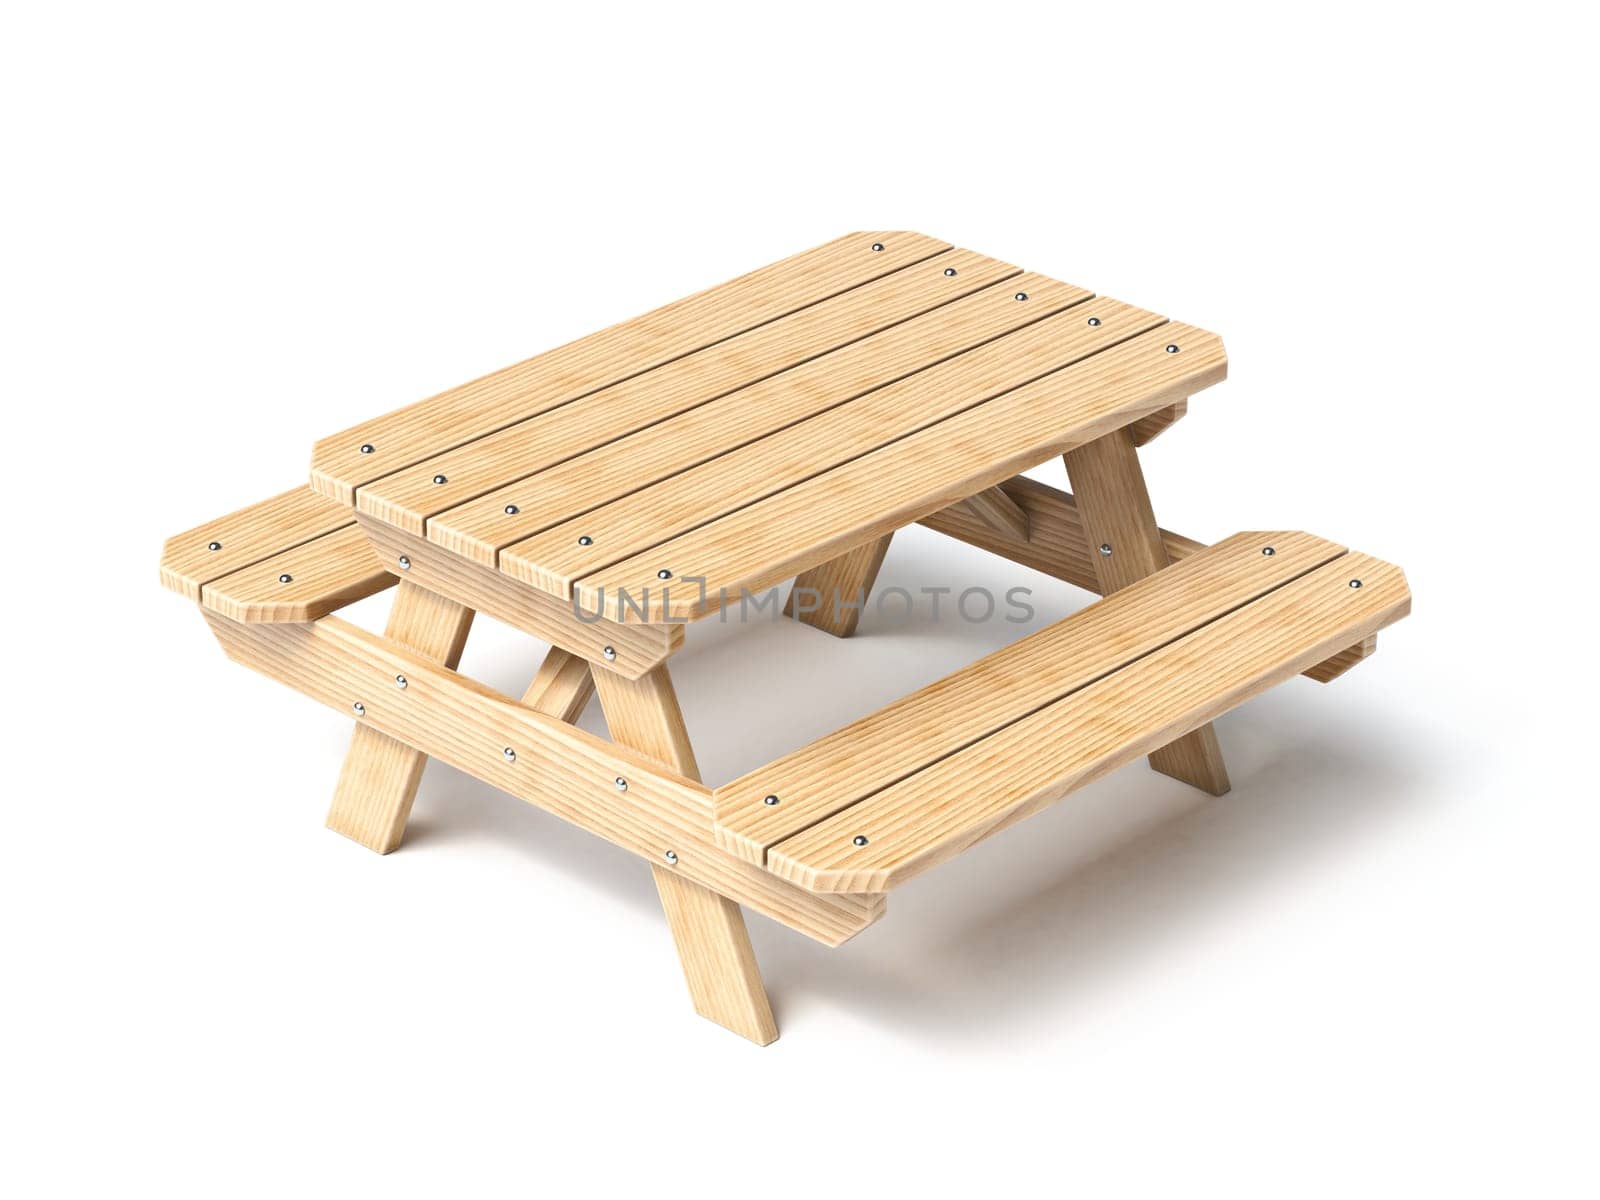 Wooden picnic table 3D rendering illustration isolated on white background